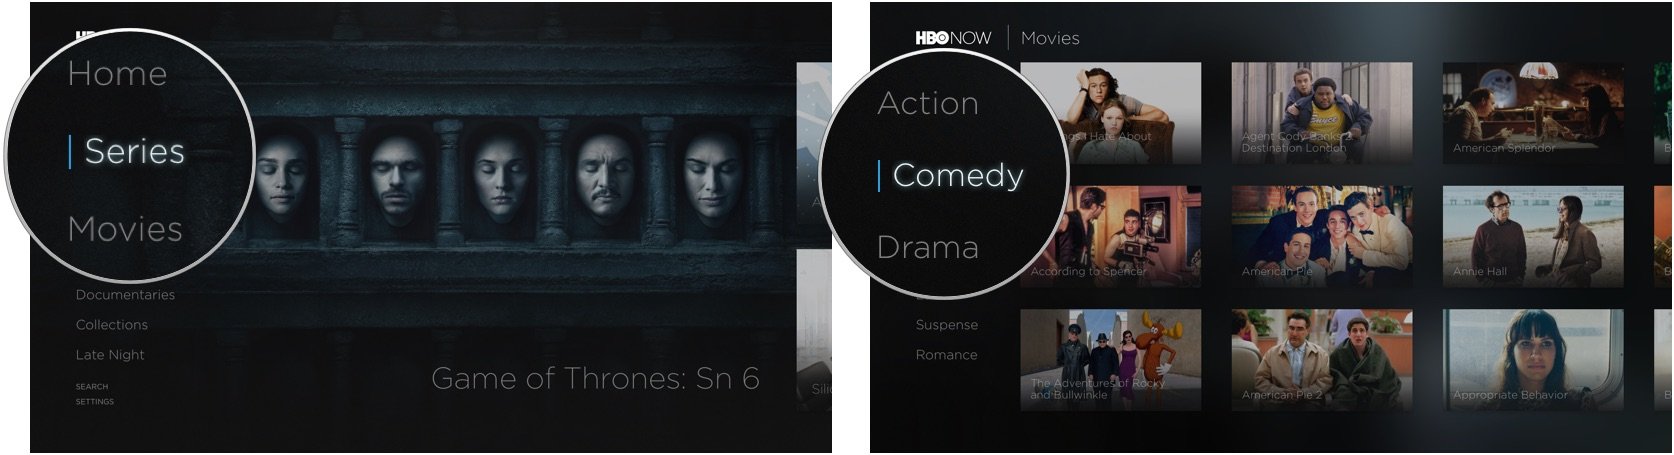 Looking up categories in HBO Now on Apple TV